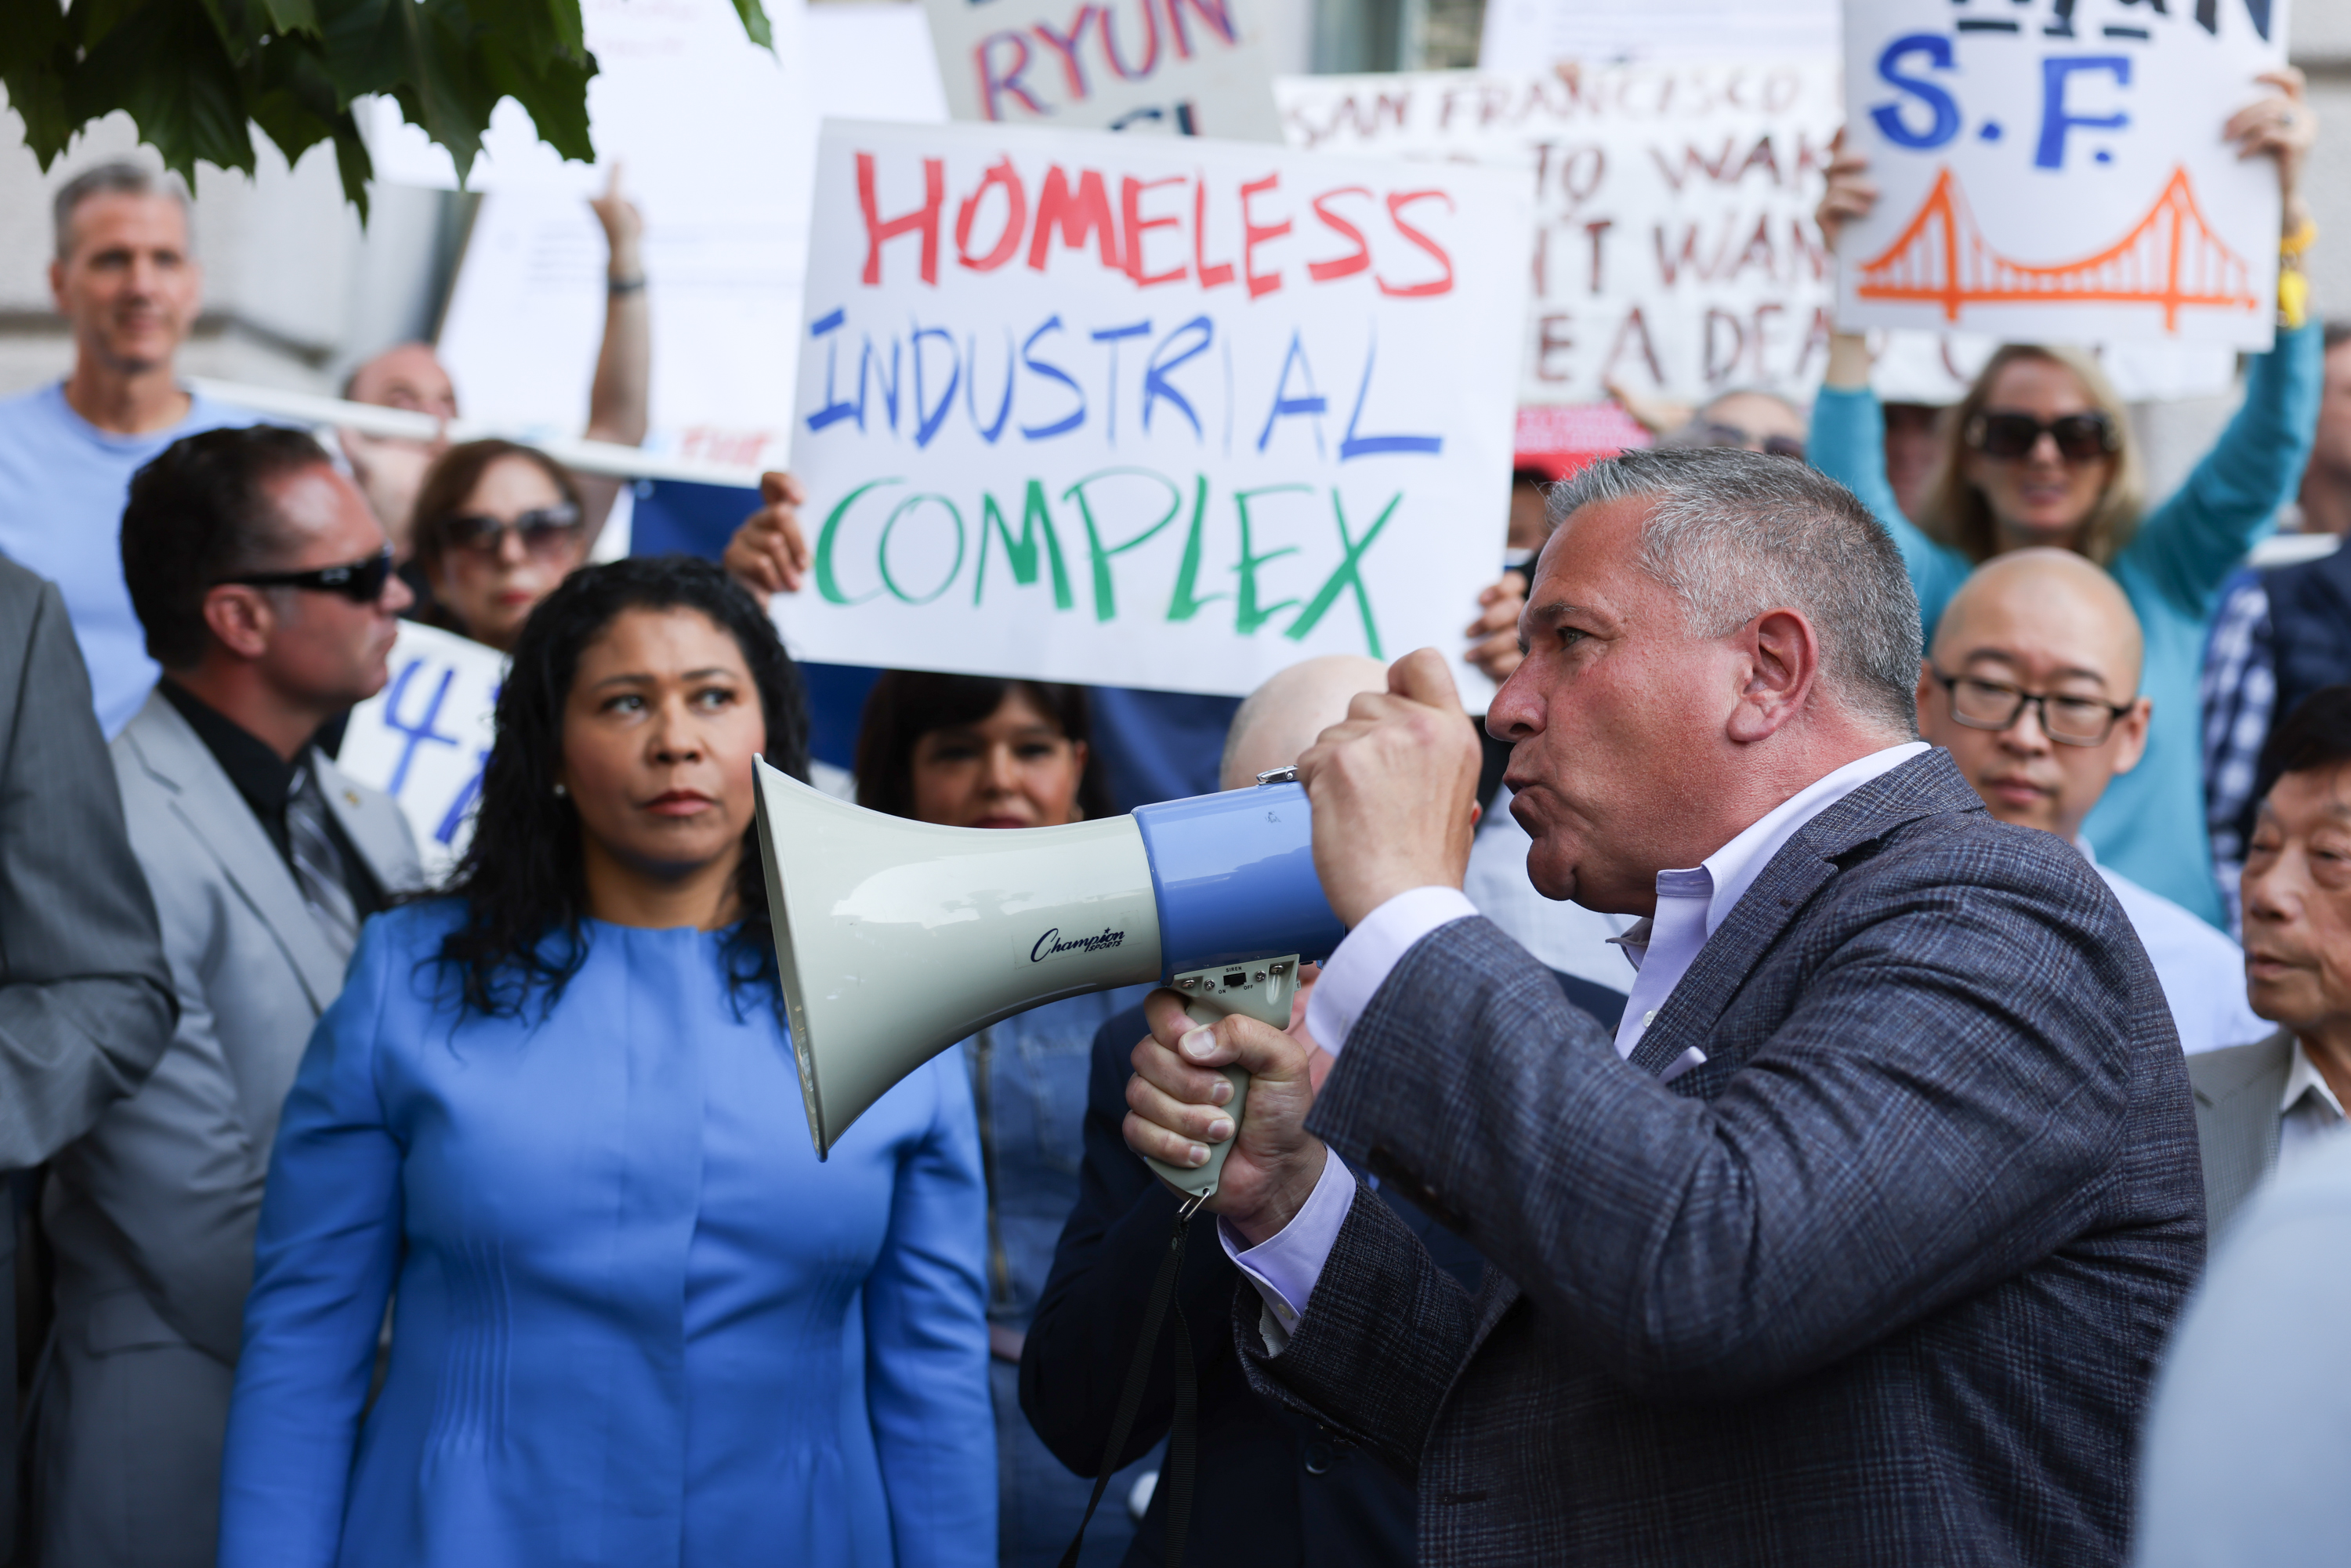 A man in a suit shouts into a bullhorn as someone holds a sign reading "homeless industrial complex" in the background.